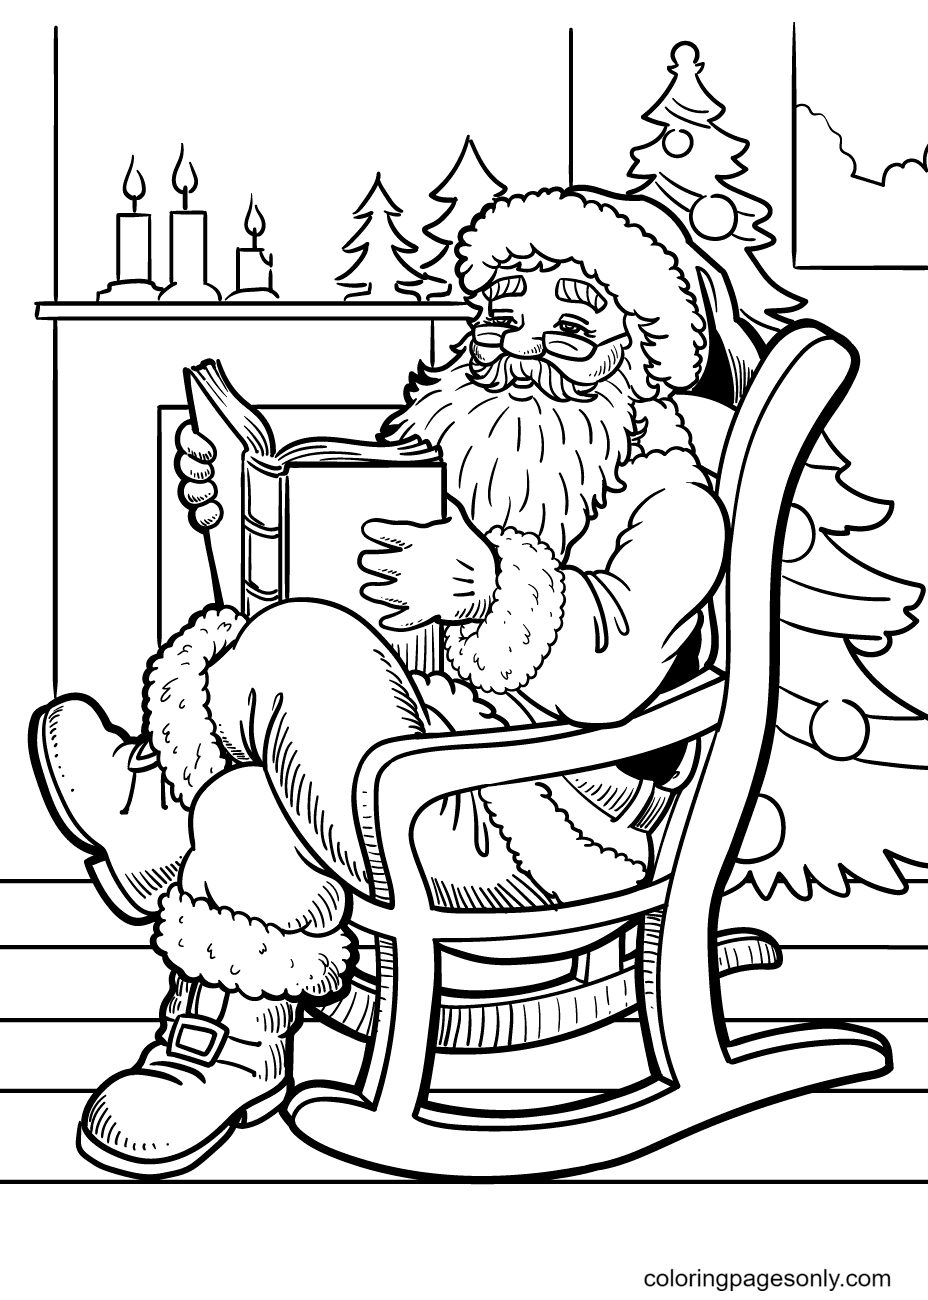 Santa Claus Sitting in the Rocking Chair Relax Coloring Page